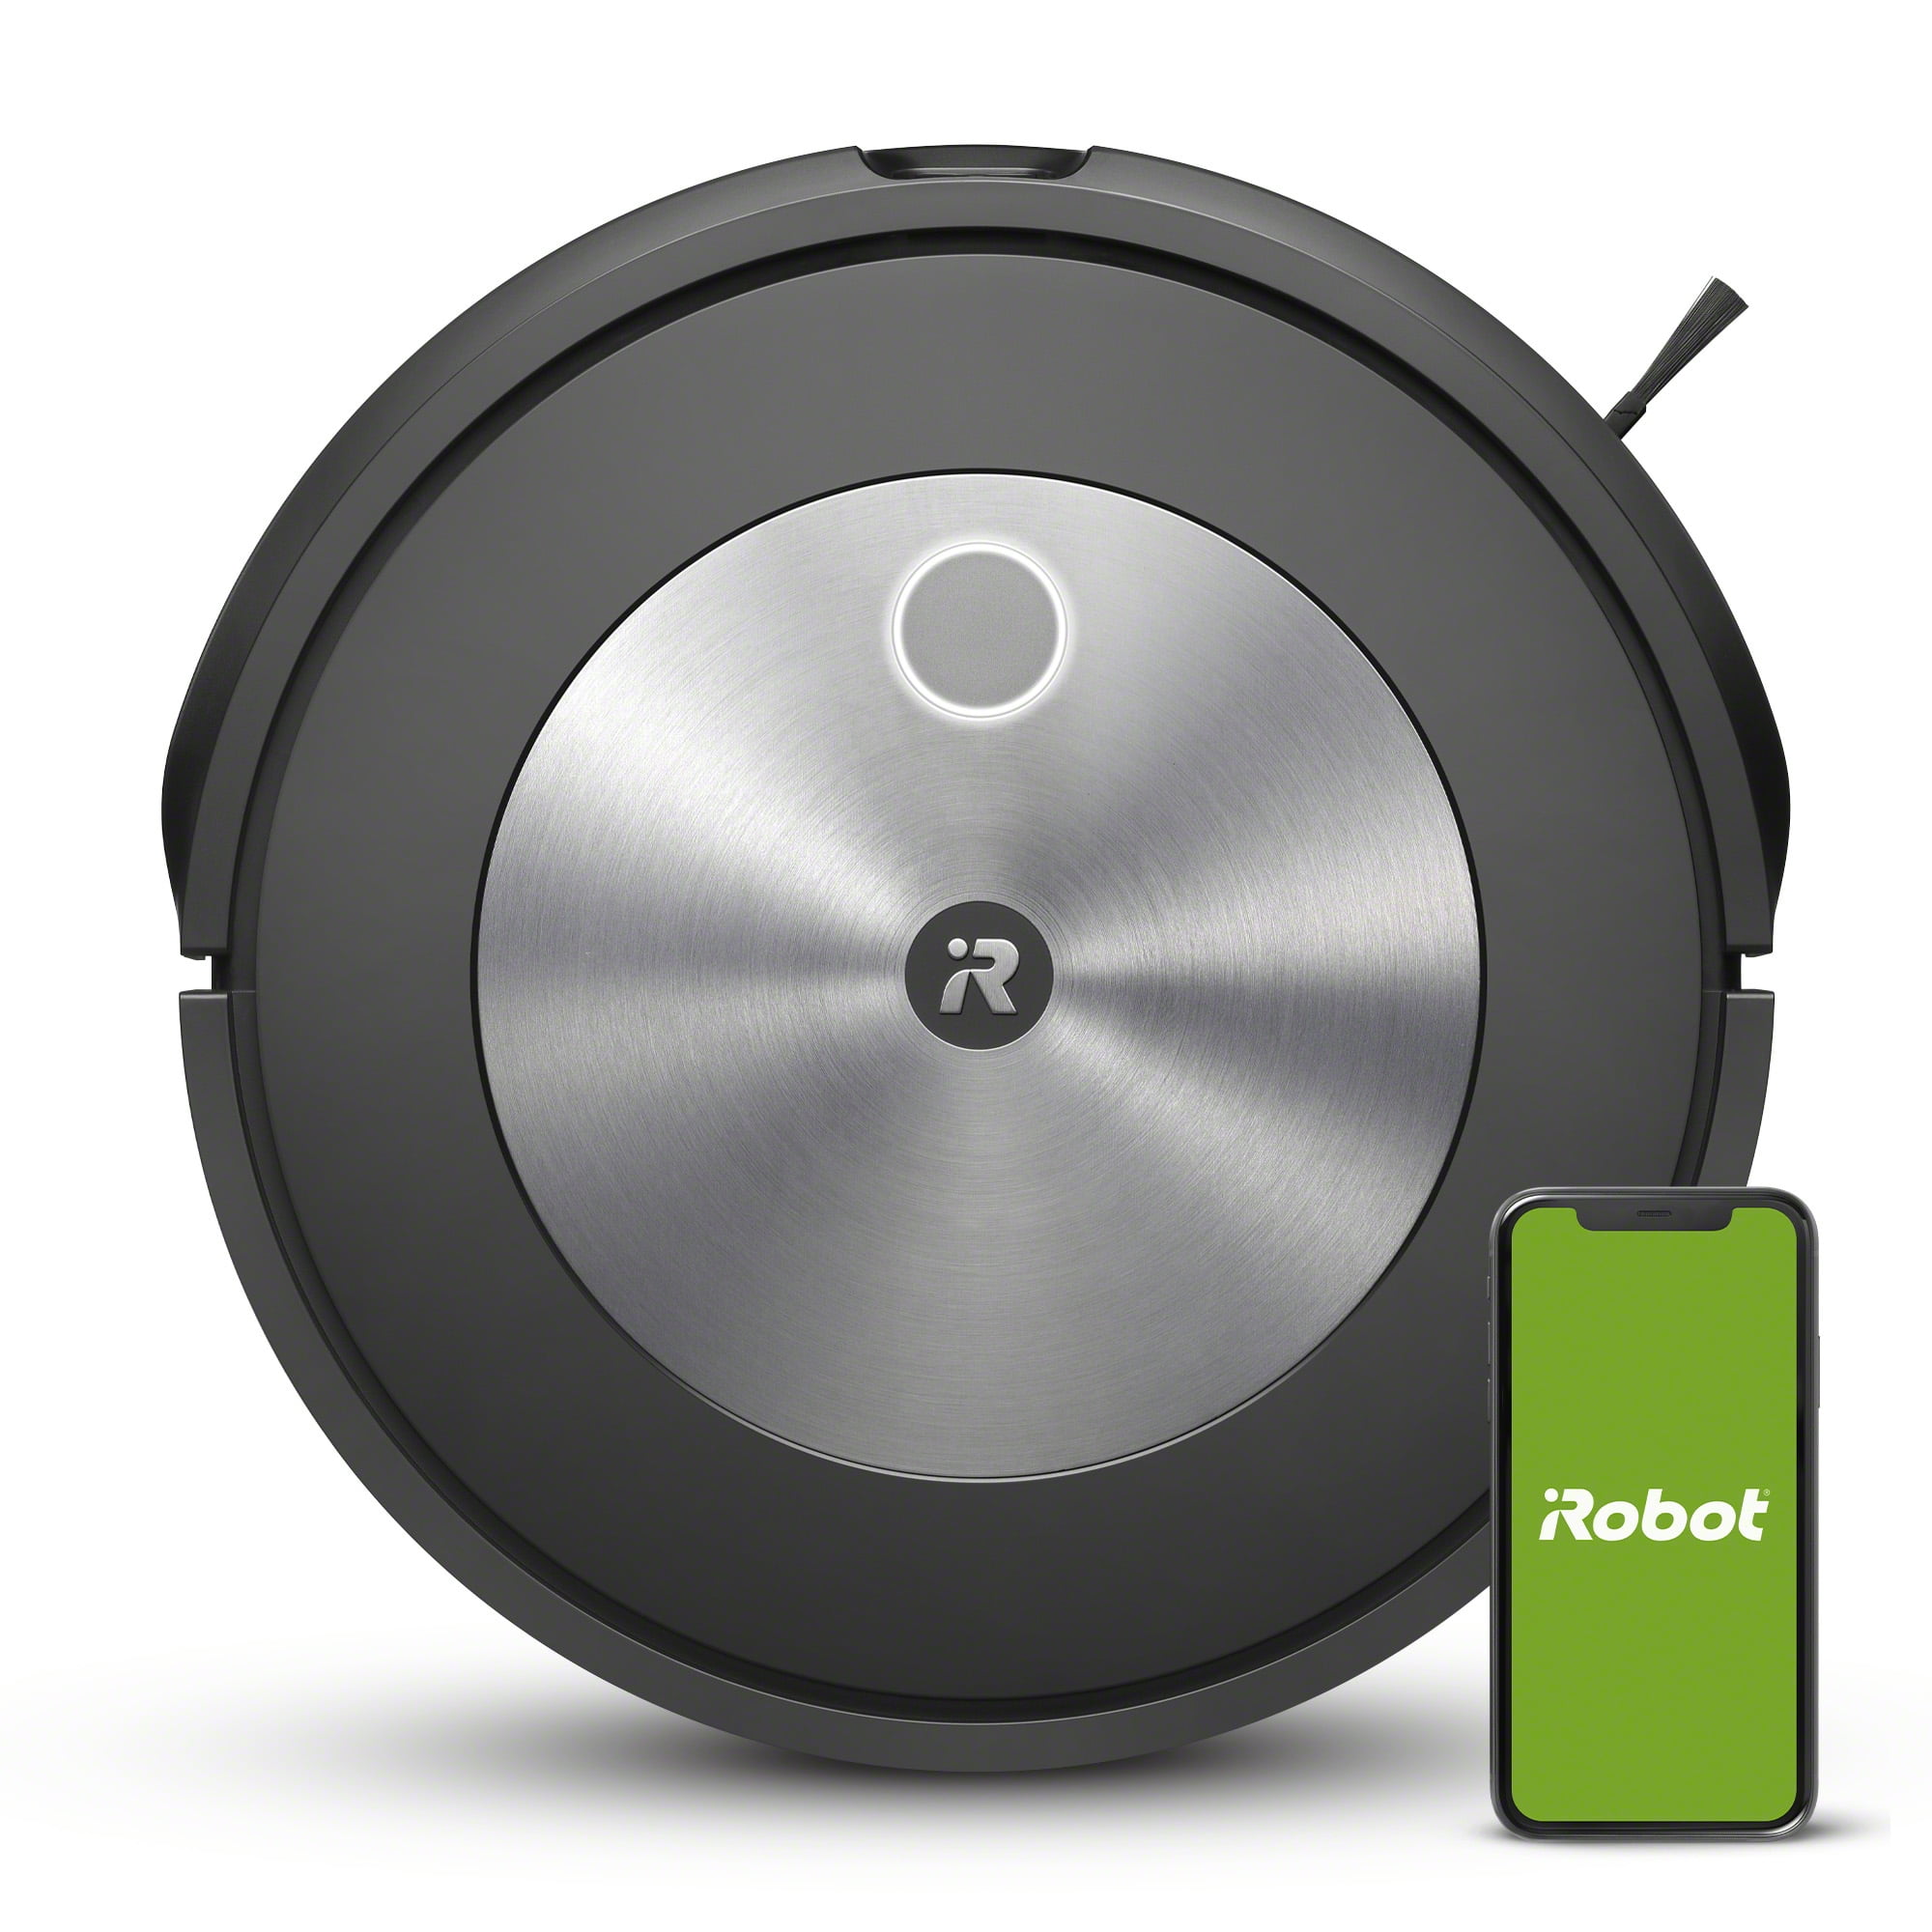 iRobot® Roomba® j7 (7150) Wi-Fi® Connected Robot Vacuum - Identifies and obstacles like pet waste & cords, Mapping, Works with Google, Ideal for Pet Hair, Carpets, Floors - Walmart.com